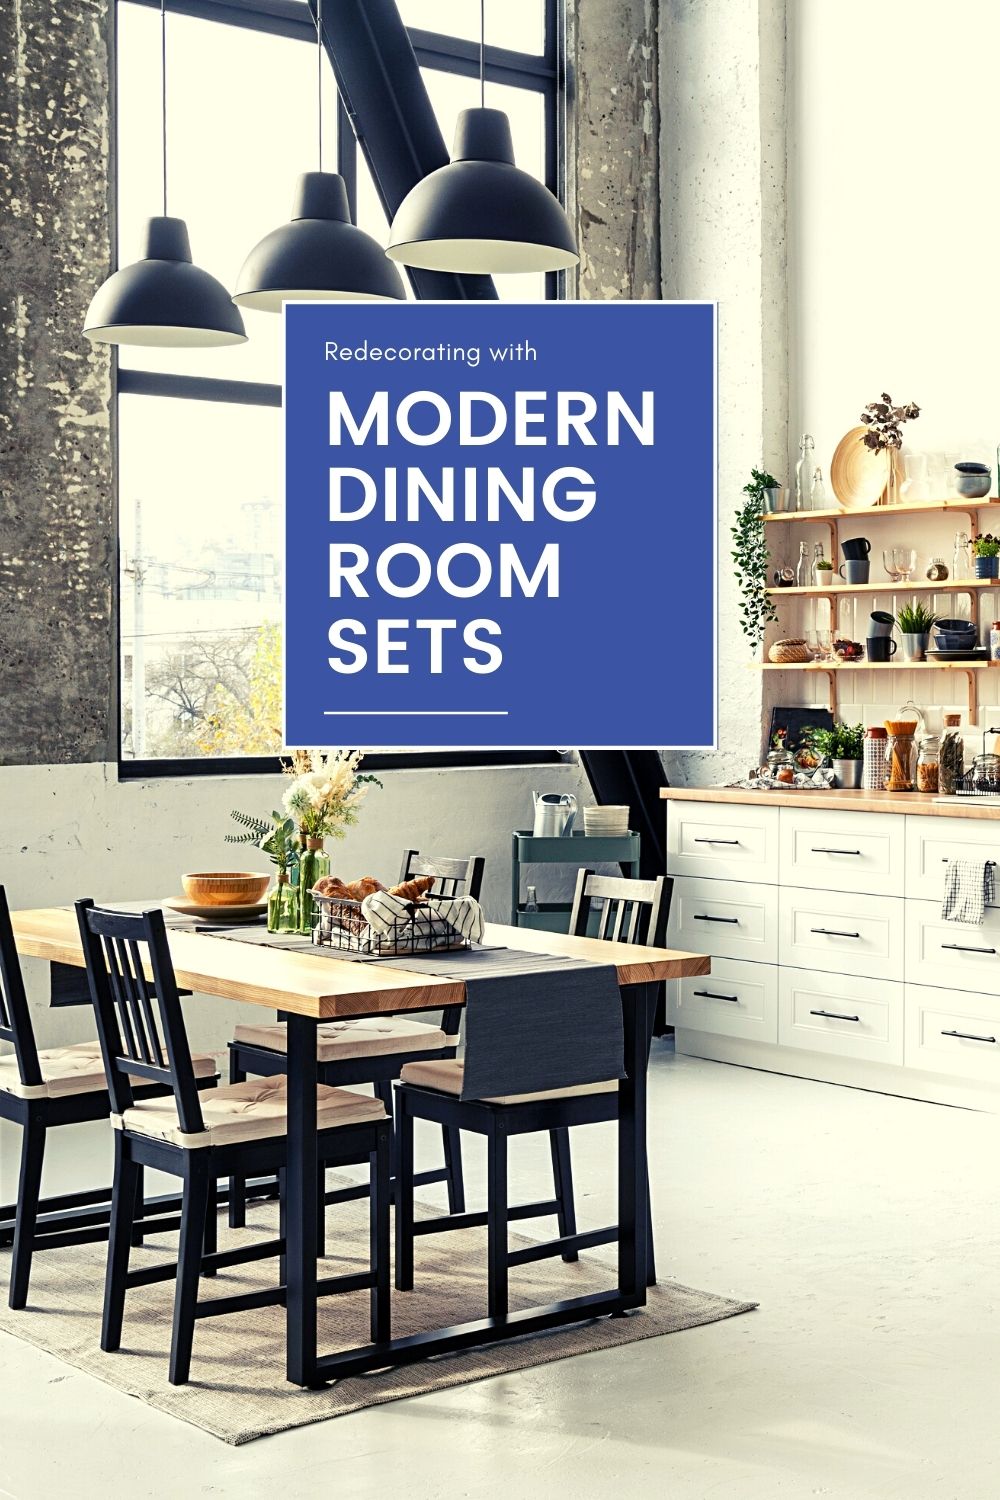 Modern-dining-room-sets-give-you-the-chance-to-create-a-more-stylish-inviting-space-just-in-time-for-spring